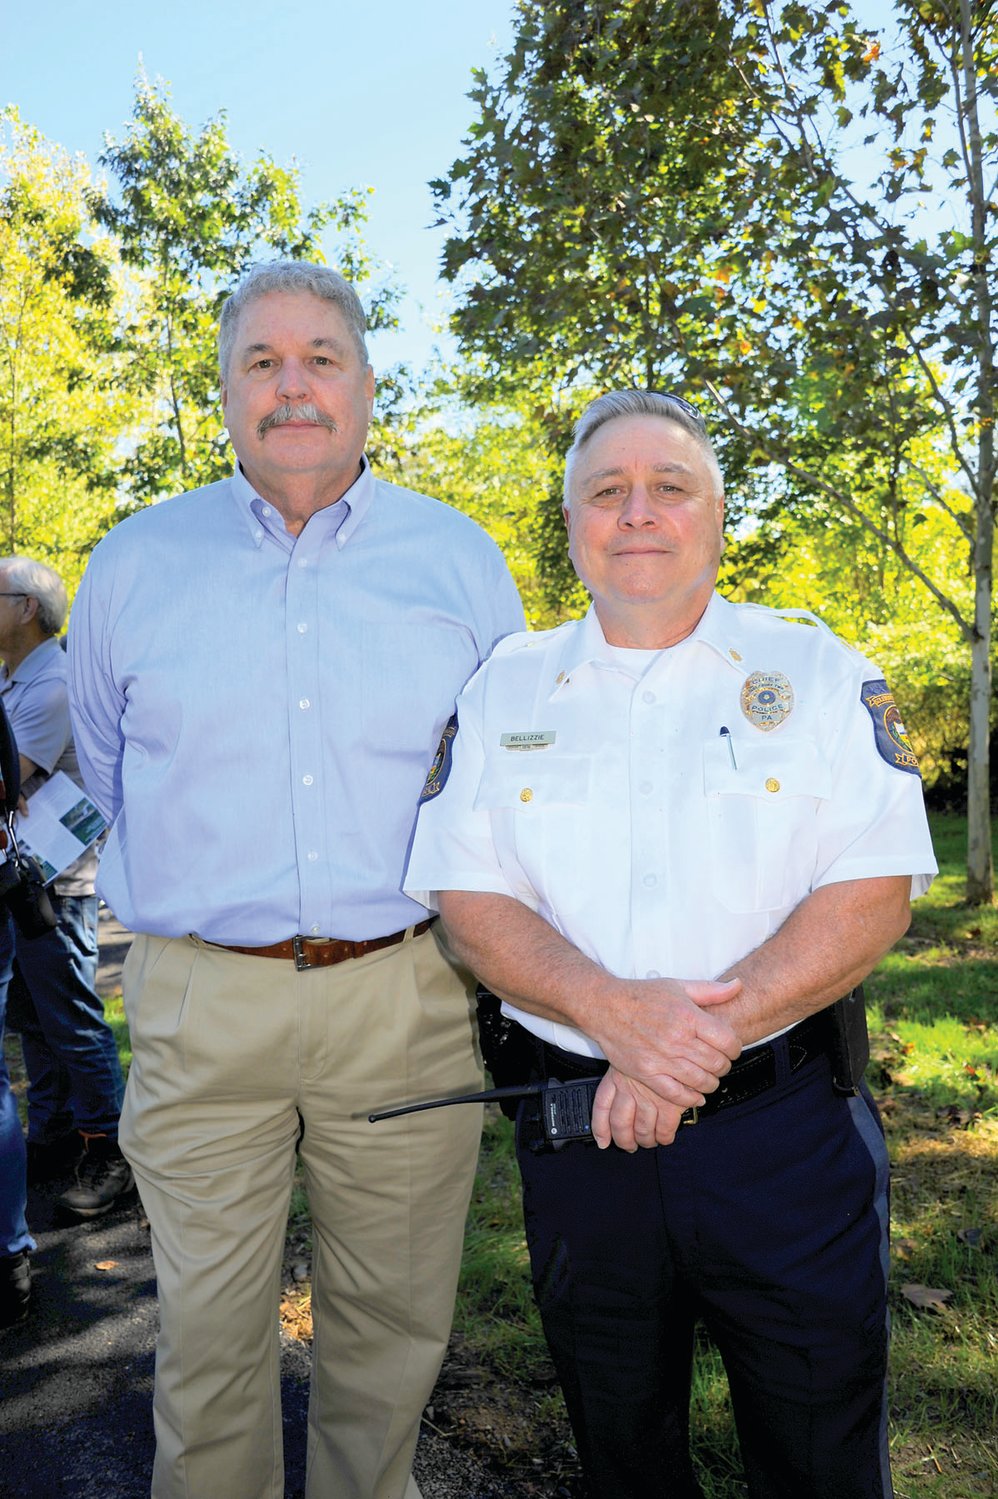 Dennis Carney, township manager, and Solebury Police Chief Dominick Bellizzie.